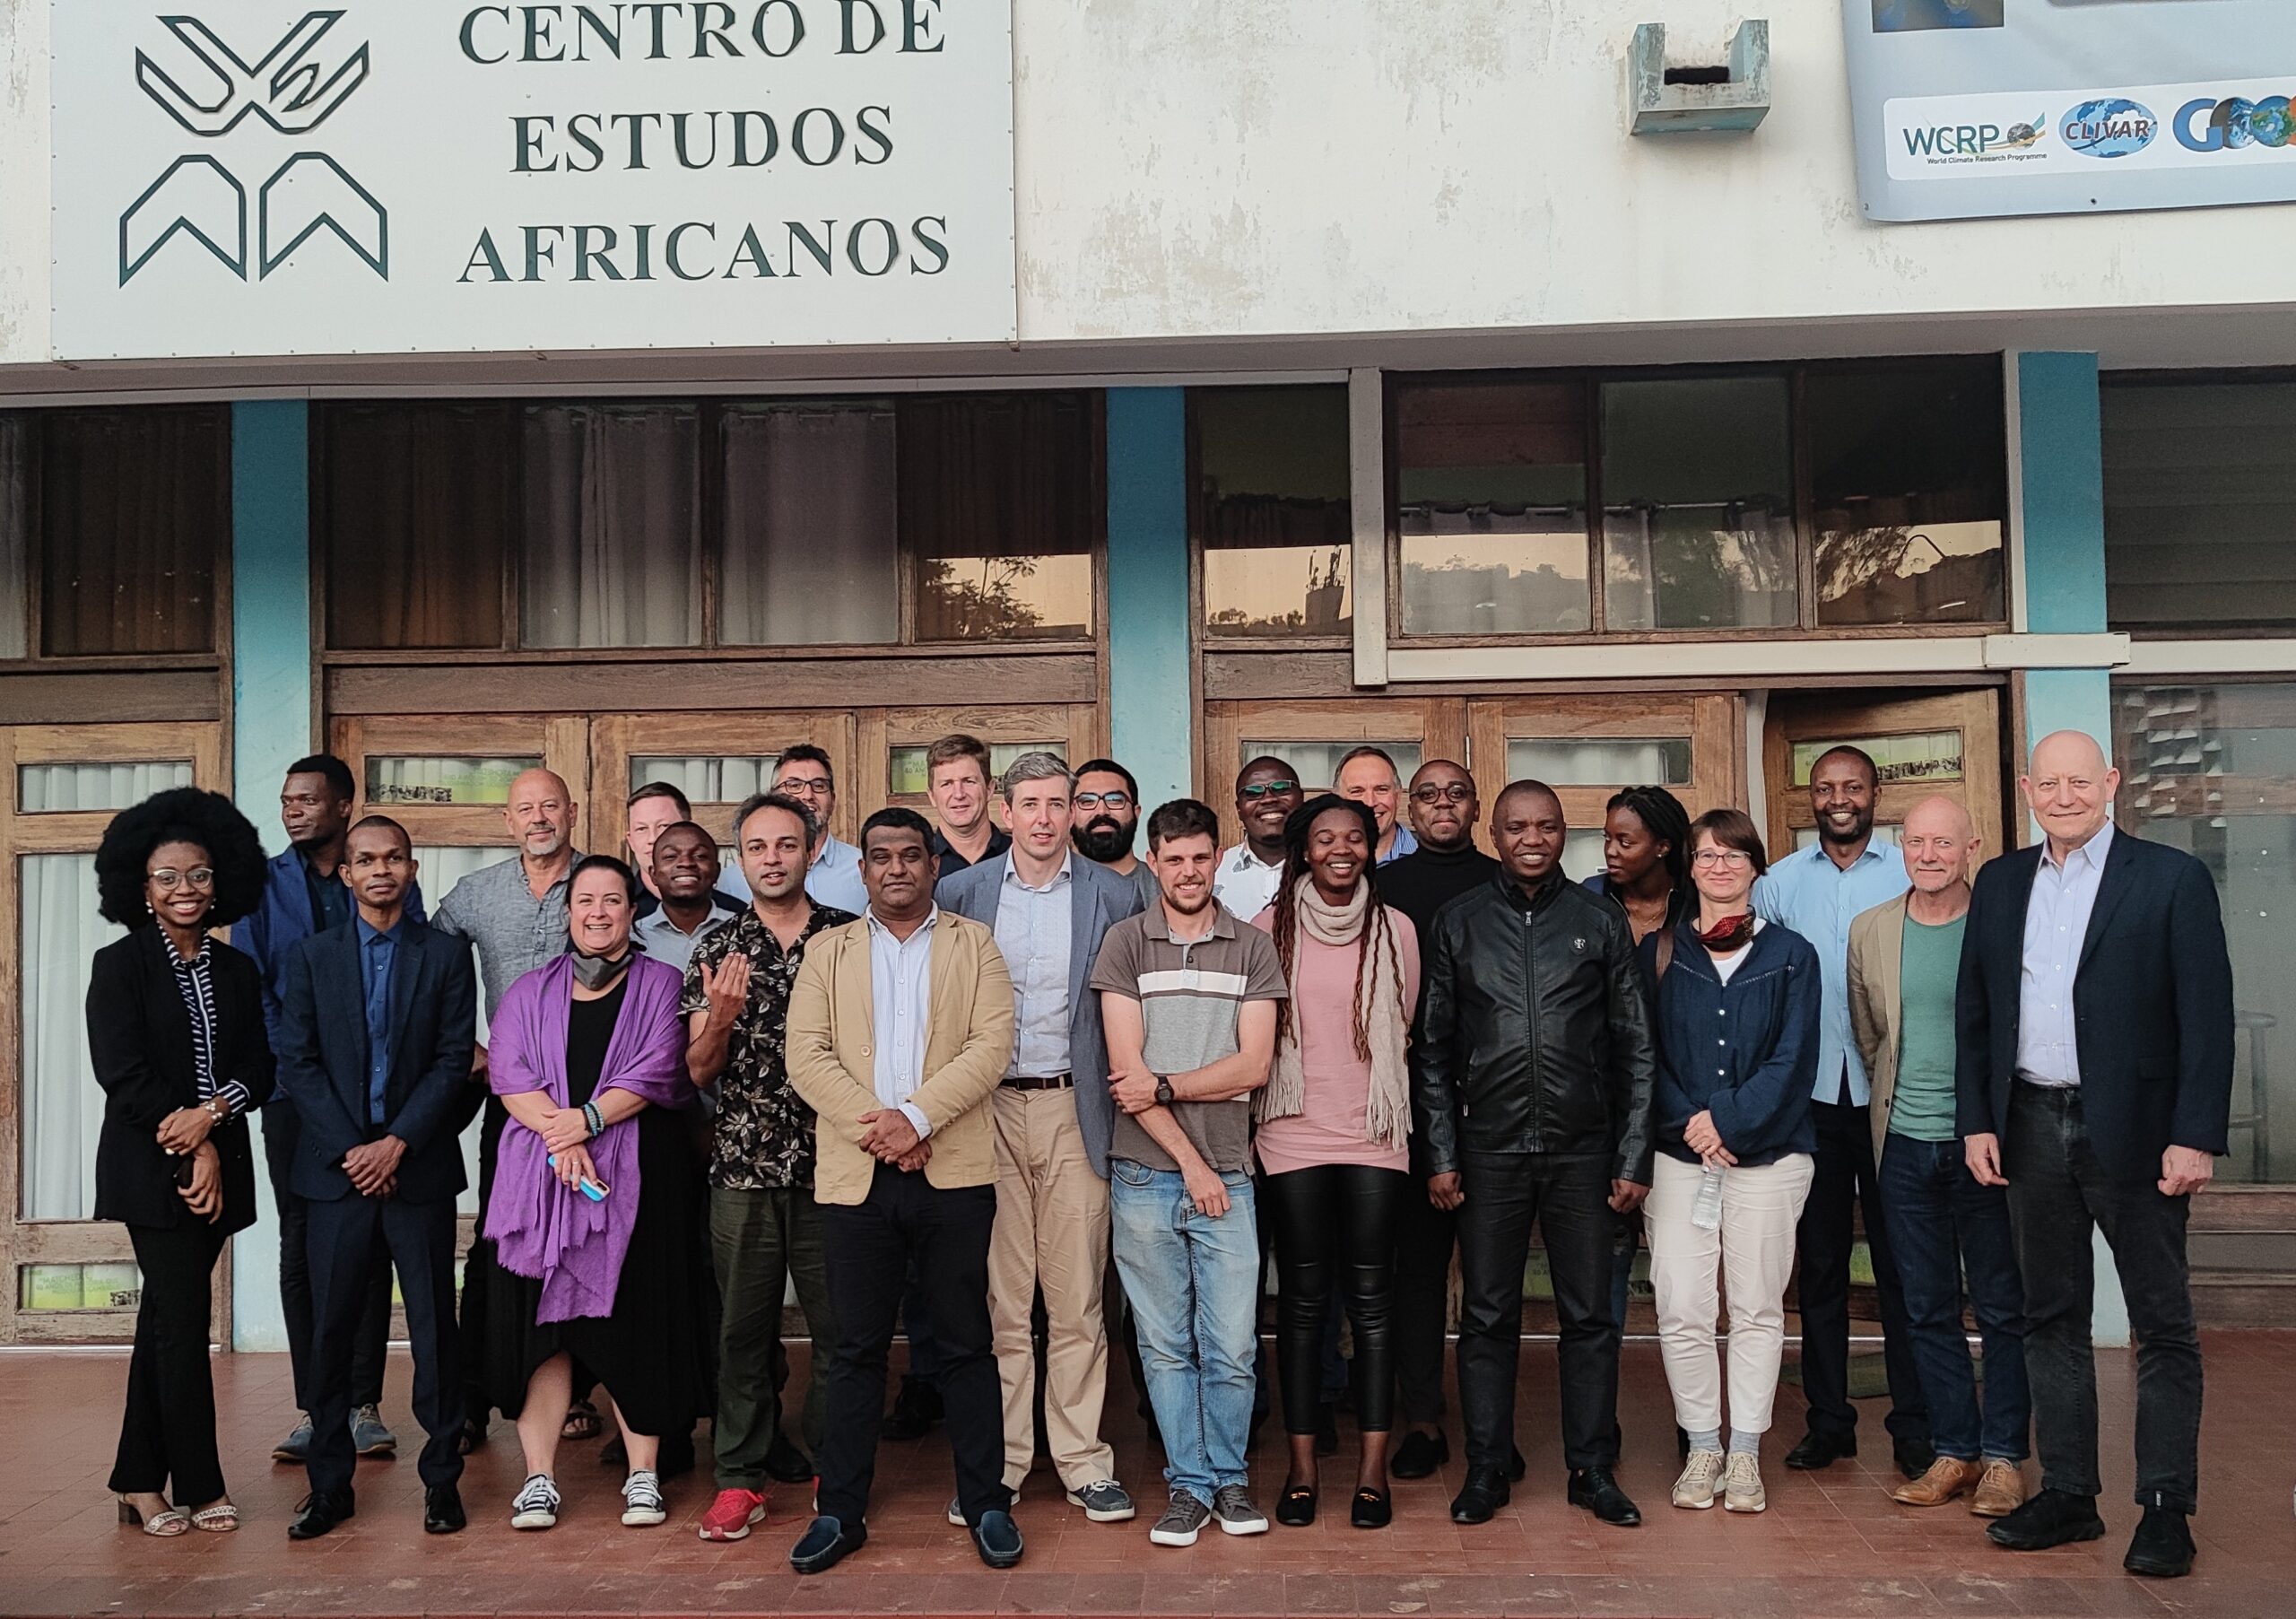 Regional Training Workshop on Observing the Coastal and Marginal Seas in the Western Indian Ocean, Maputo, Mozambique